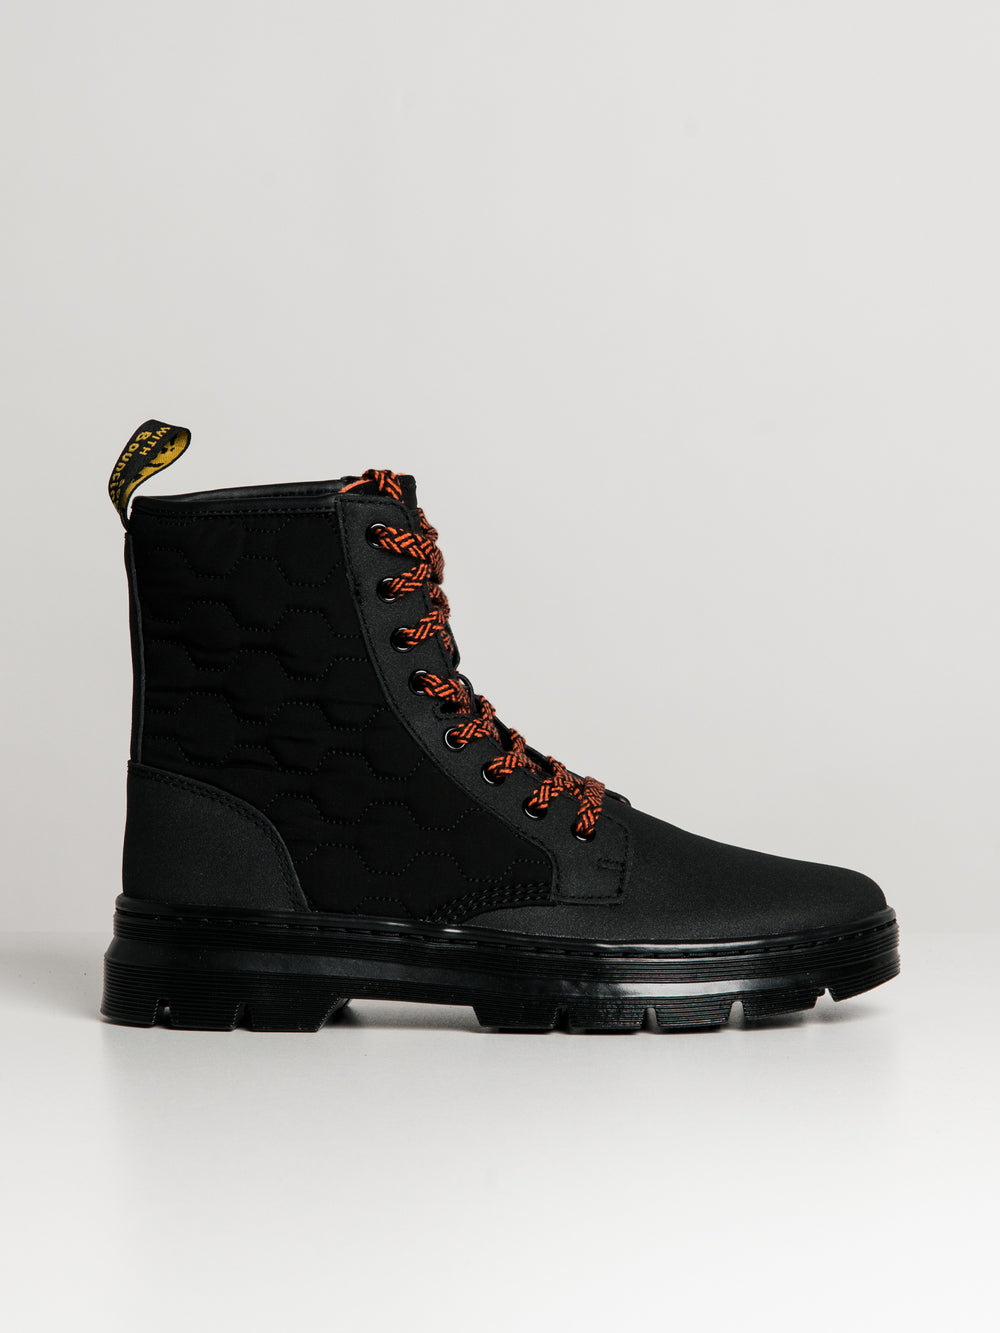 DR MARTENS COMBS II DUAL ORG BOOT - CLEARANCE